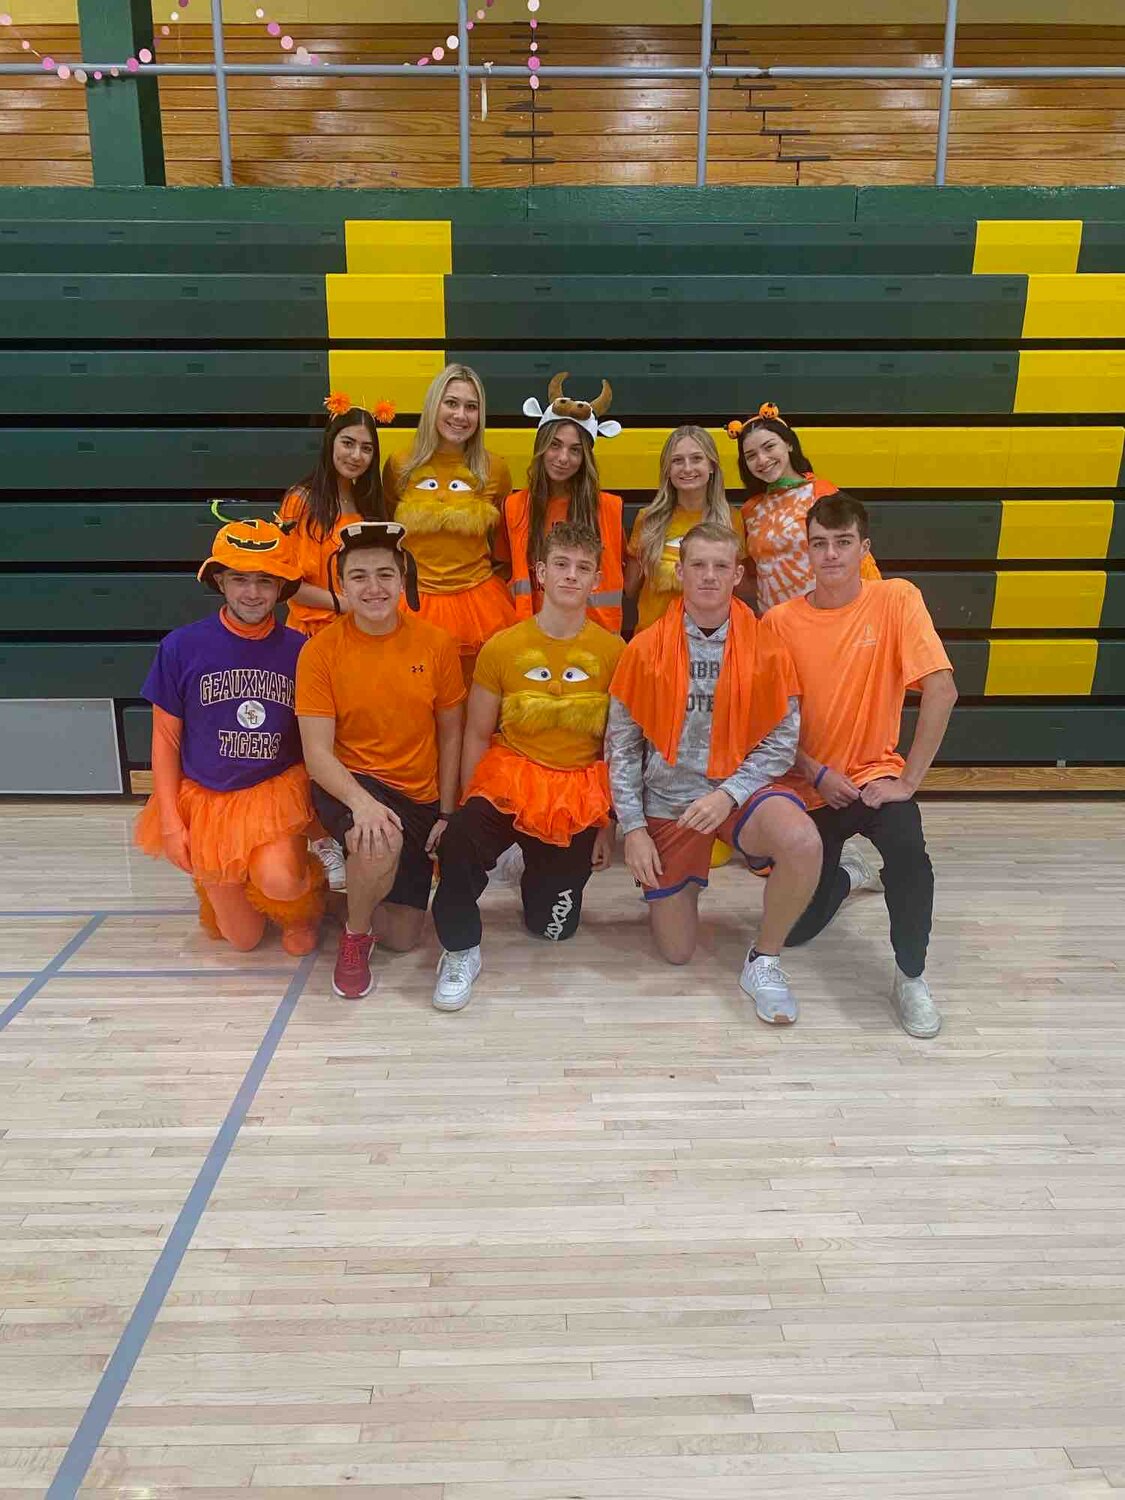 Lynbrook High School’s homecoming court showed their united stand against bullying with orange costumes and clothes.